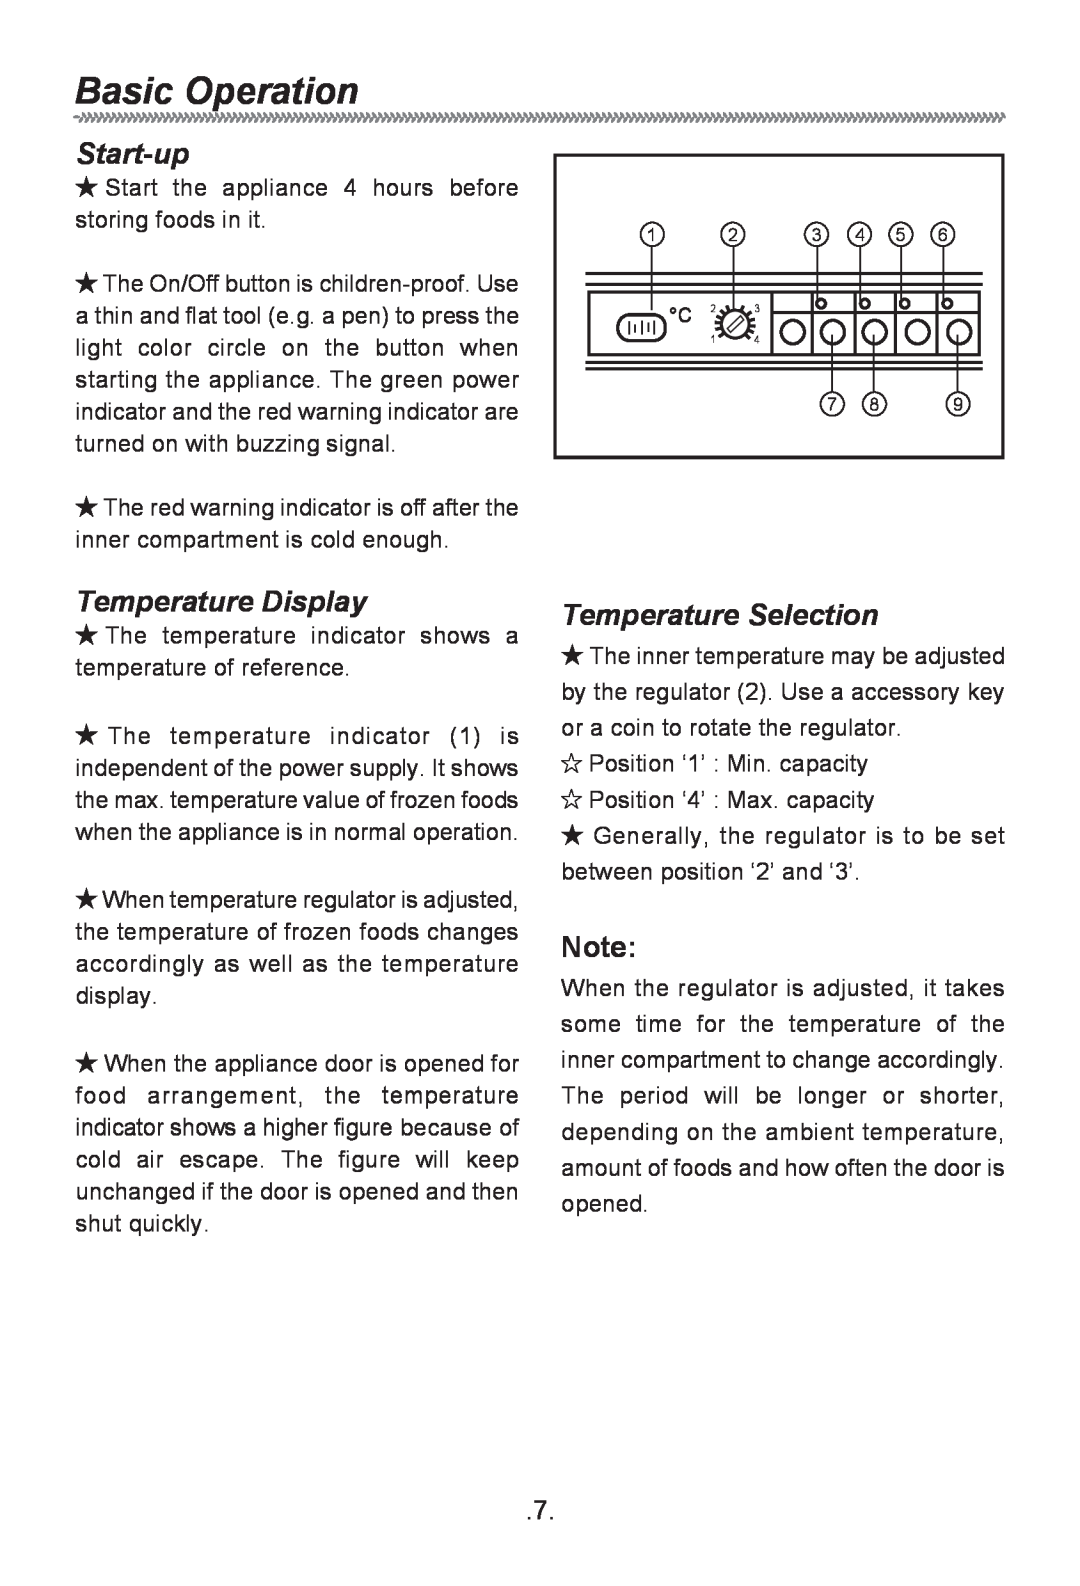 Haier HF-240T owner manual Start-up, Temperature Display, Temperature Selection, Basic Operation 